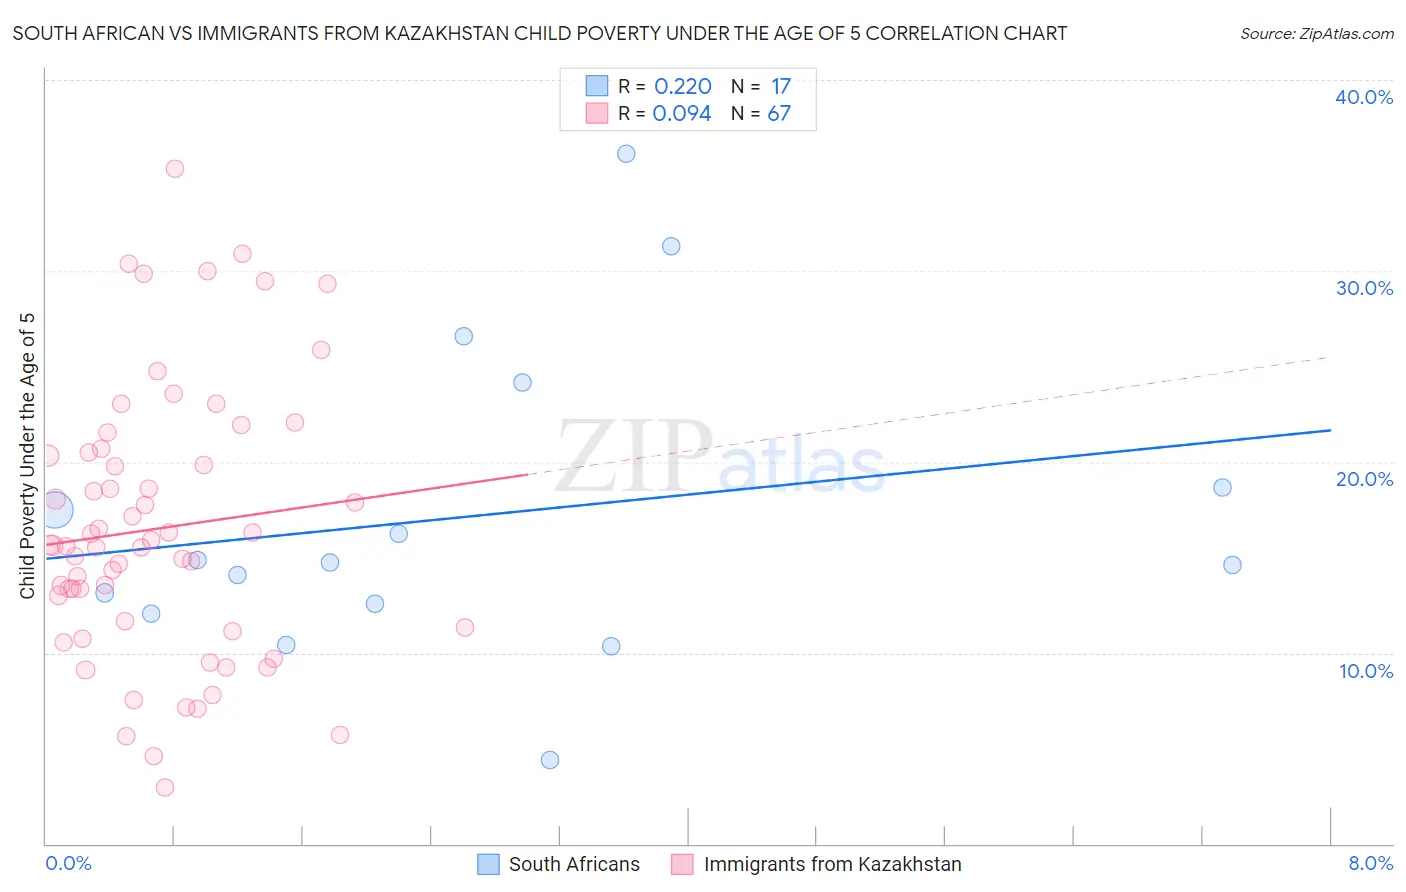 South African vs Immigrants from Kazakhstan Child Poverty Under the Age of 5